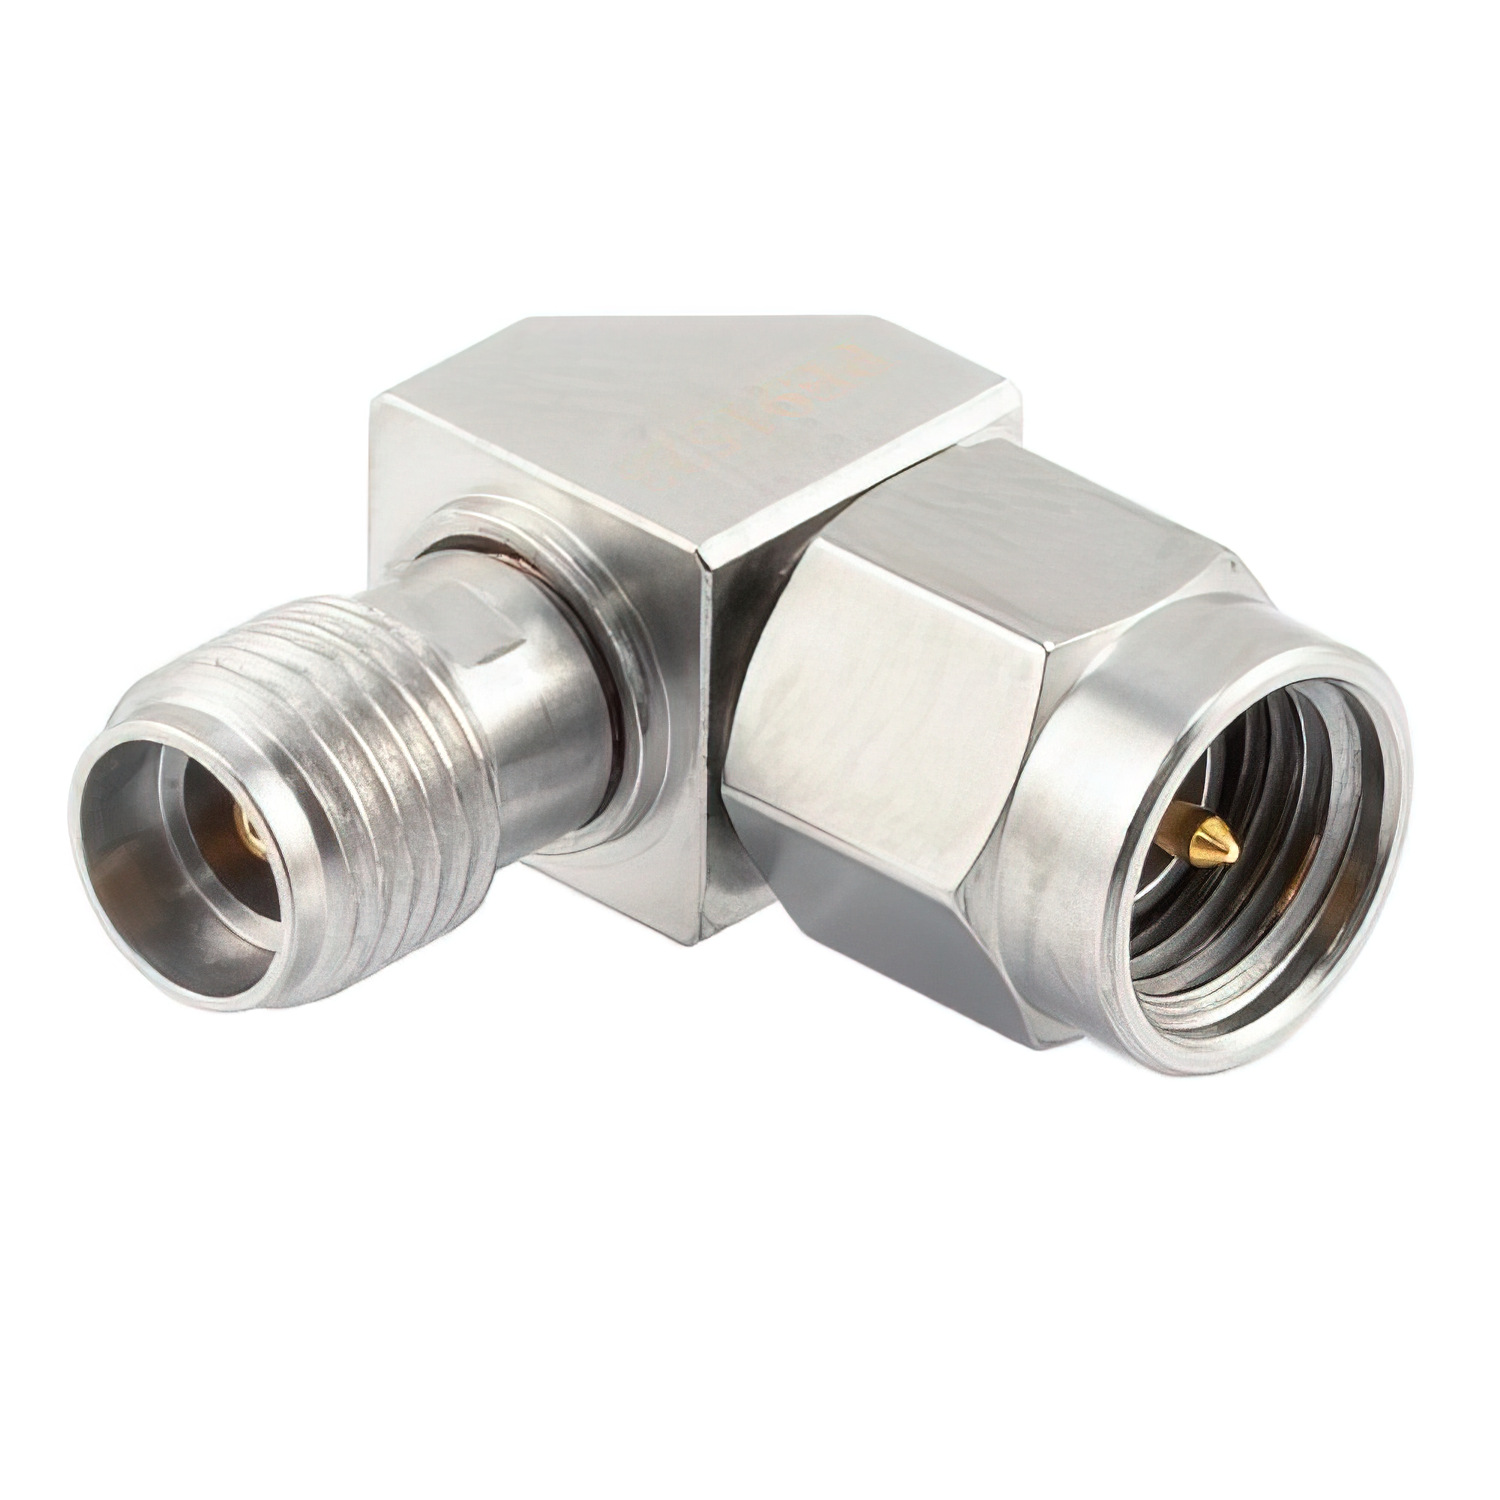 3.5mm Male to 3.5mm Female Miter Right Angle Adapter1